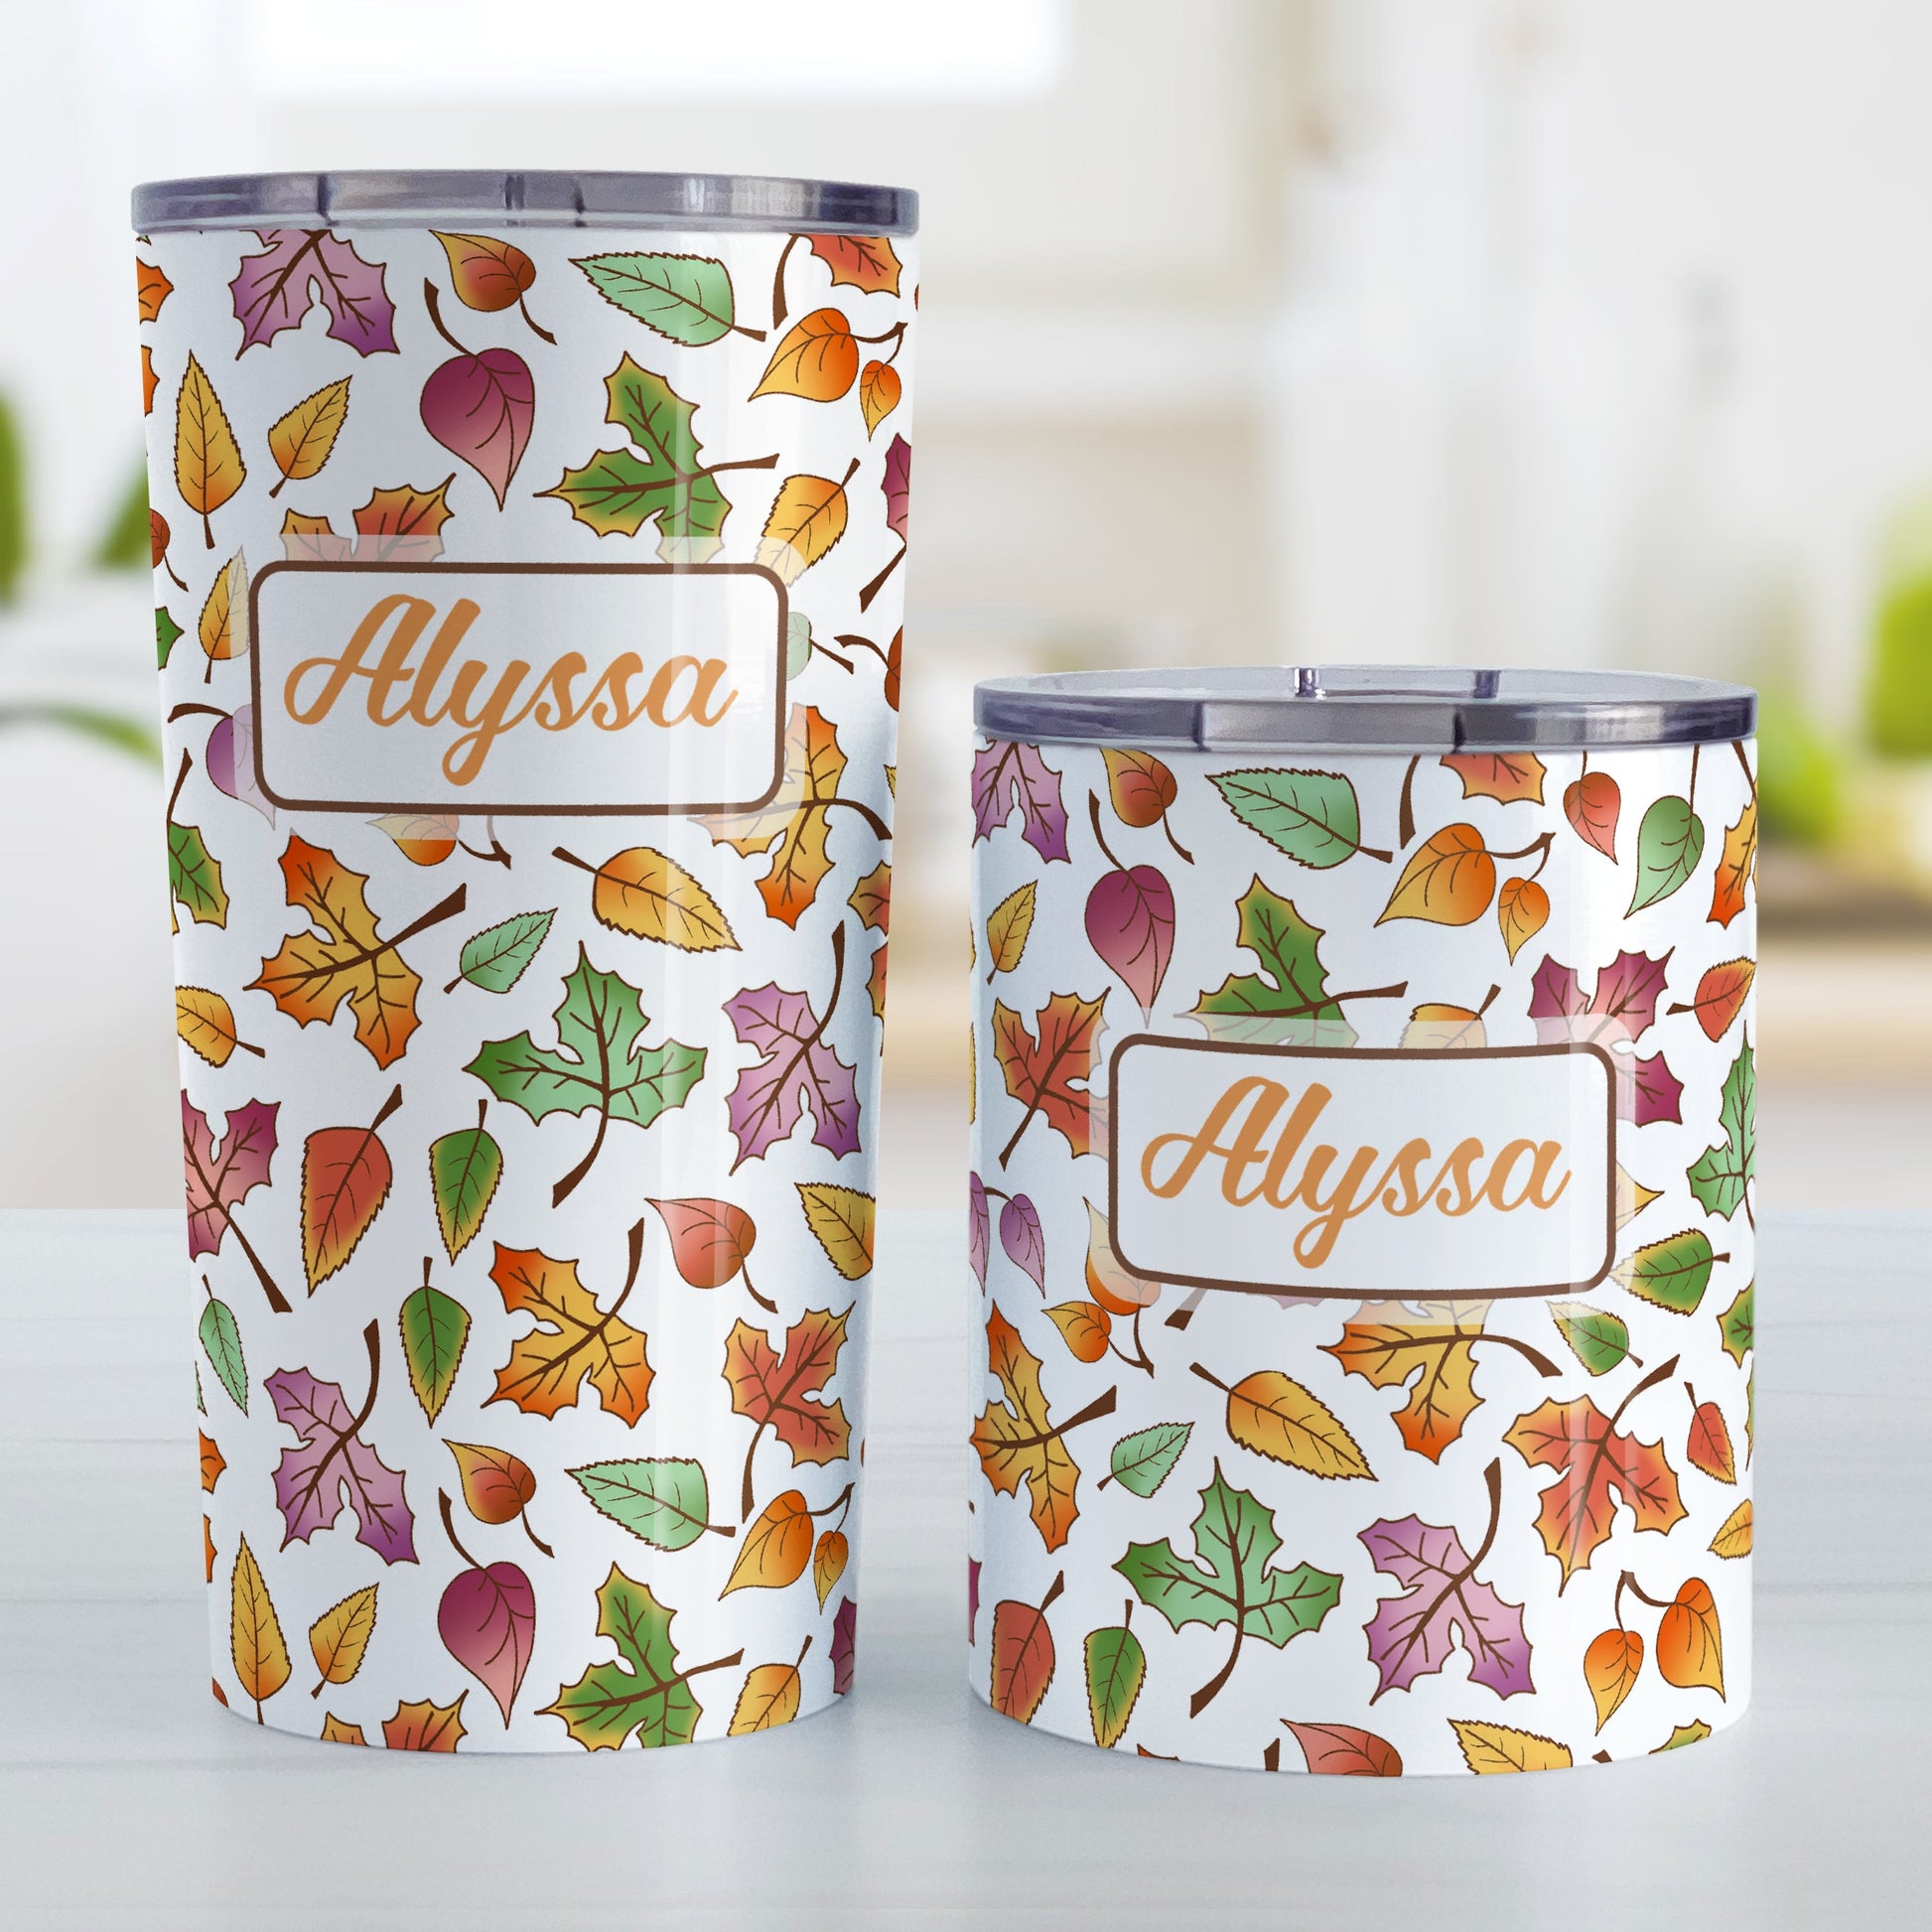 Personalized Changing Leaves Fall Tumbler Cups (20oz or 10oz) at Amy's Coffee Mugs. Stainless steel insulated tumbler cups designed with a fall themed pattern of leaves changing colors, as they do at the beginning of autumn, that wraps around the cups. Your personalized name is custom printed in an orange script font in a white rectangle over the leaves pattern. Photo shows both sized cups next to each other.